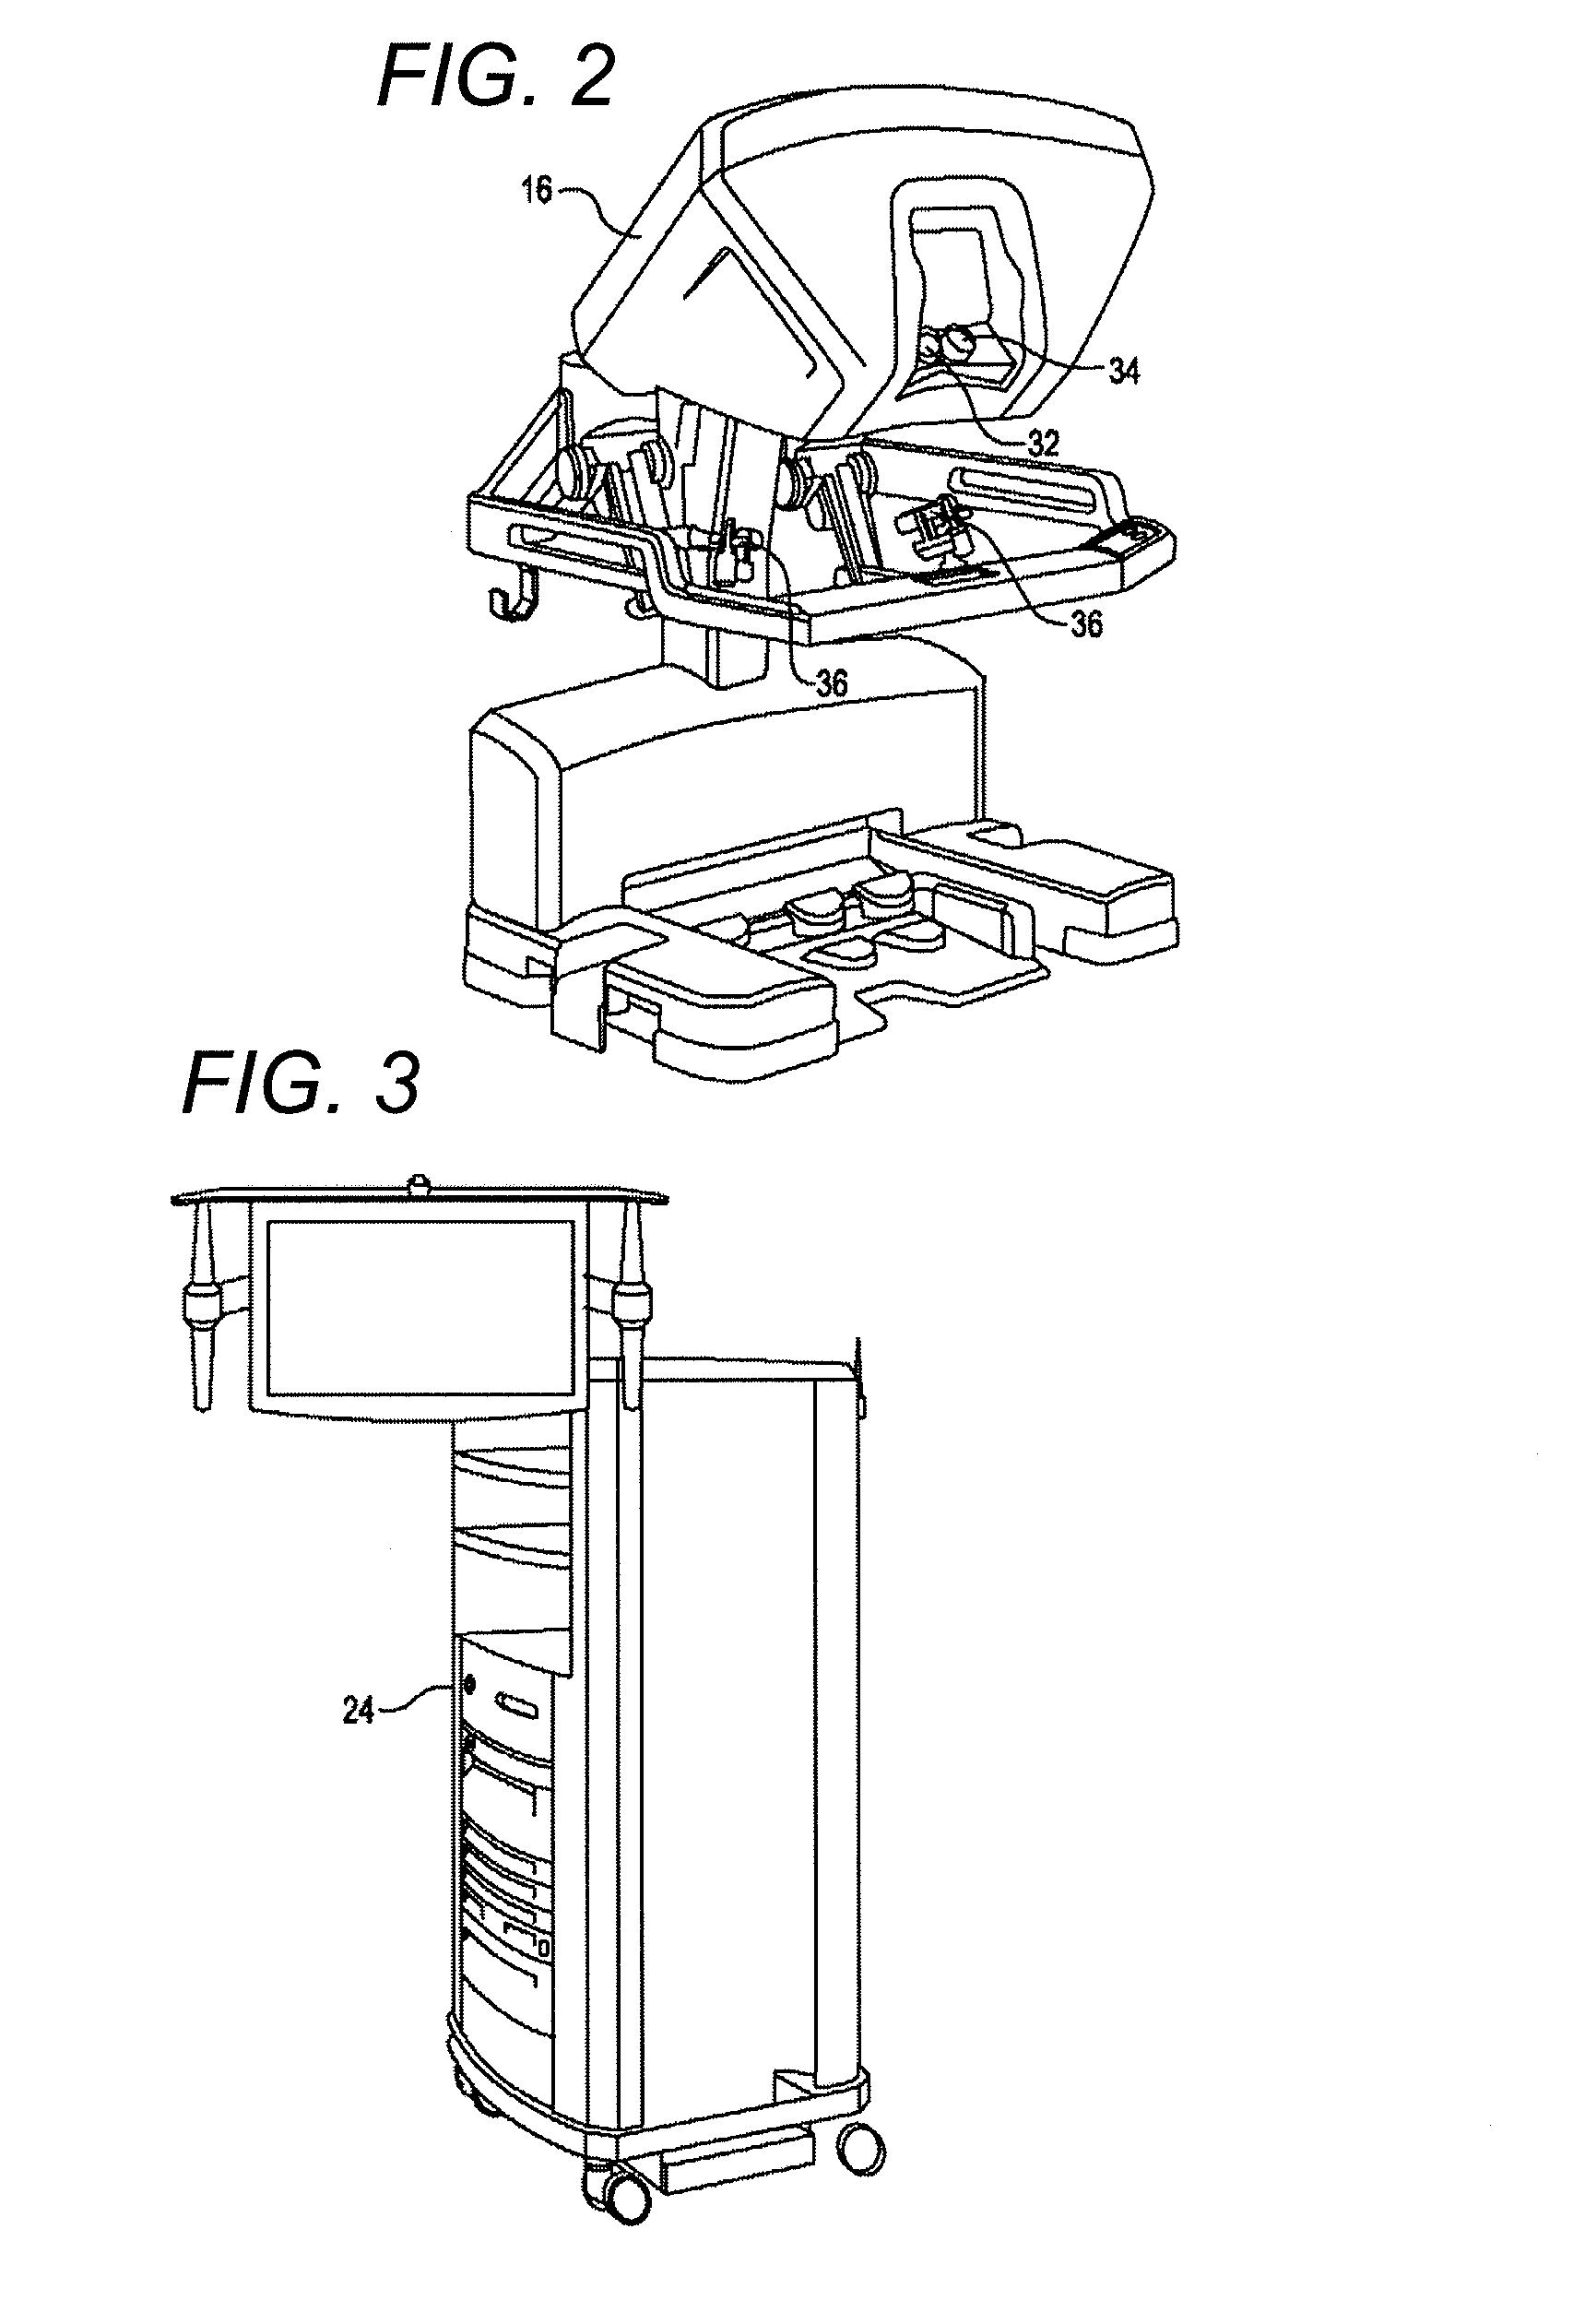 Movable surgical mounting platform controlled by manual motion of robotic arms